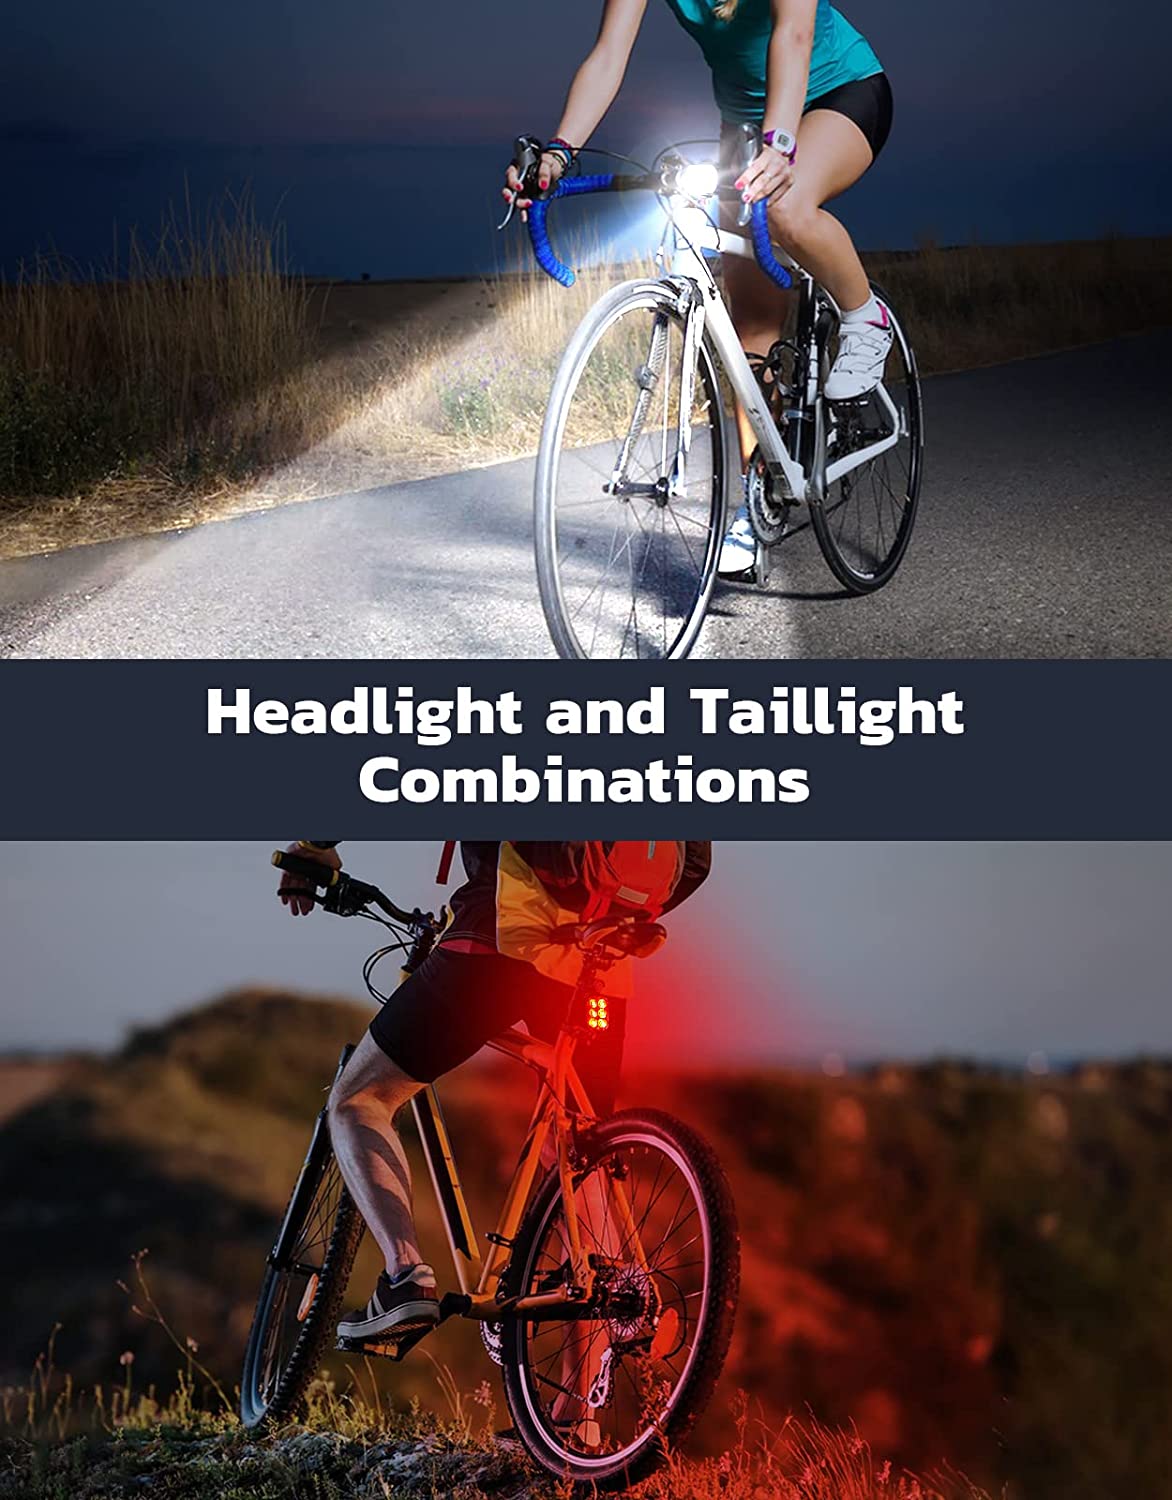 Bicycle Light 4+6 Modes Waterproof IP65 Bike Headlight and Tail Light Set USB Rechargeable Bike Lights for Night Riding